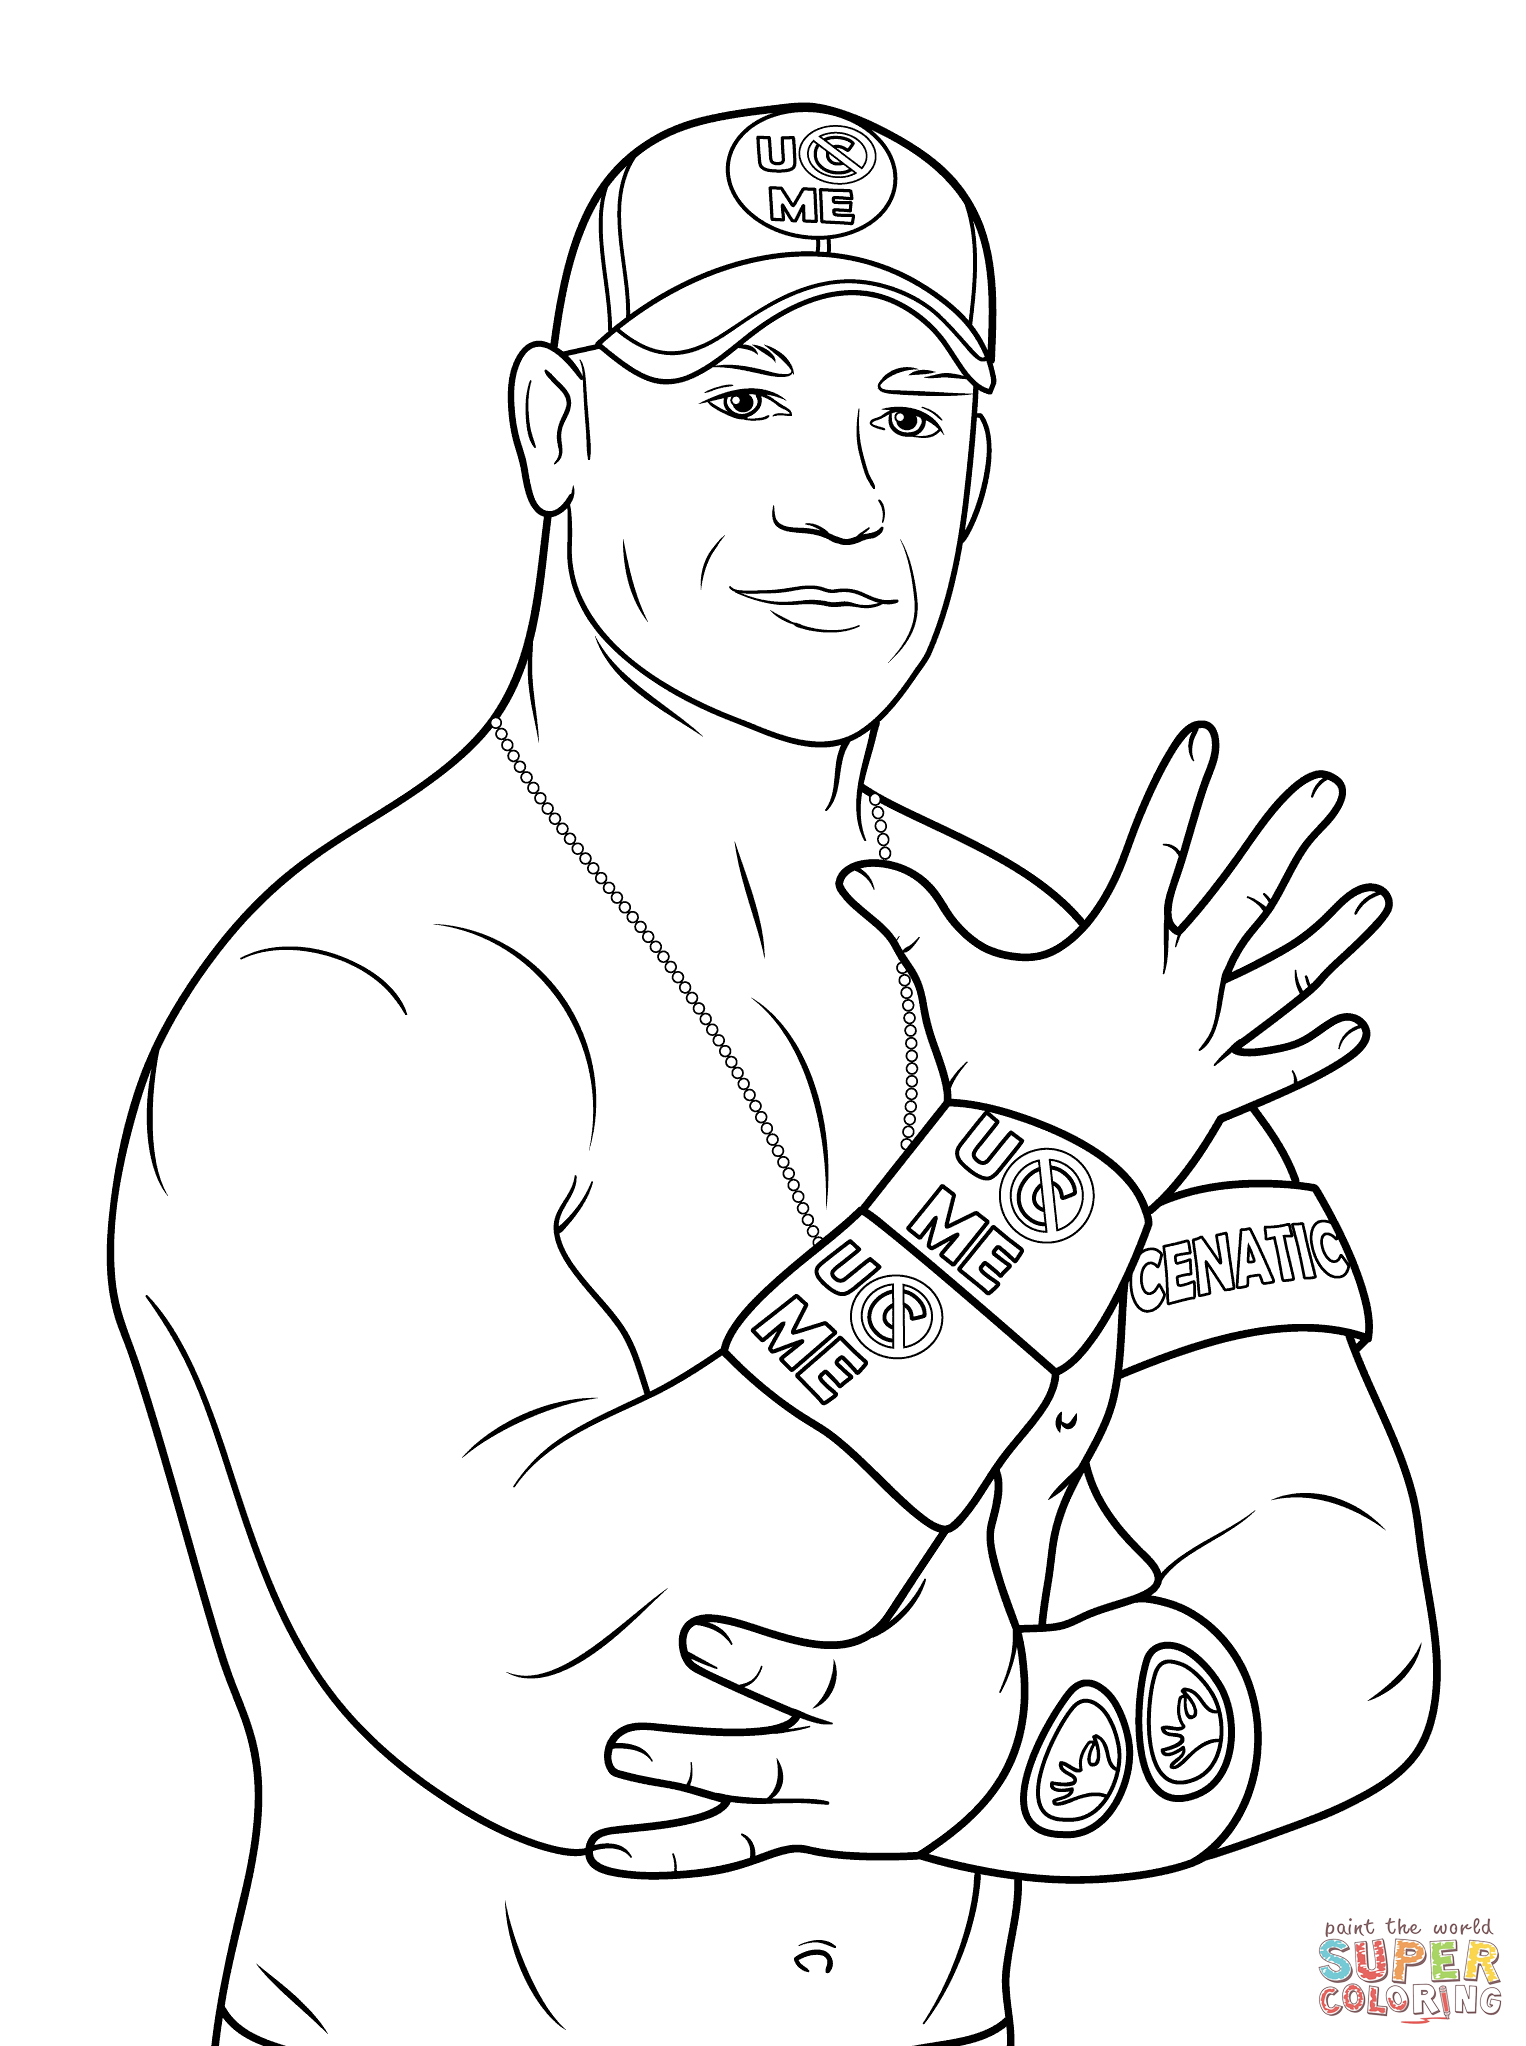 John cena coloring page free printable coloring pages